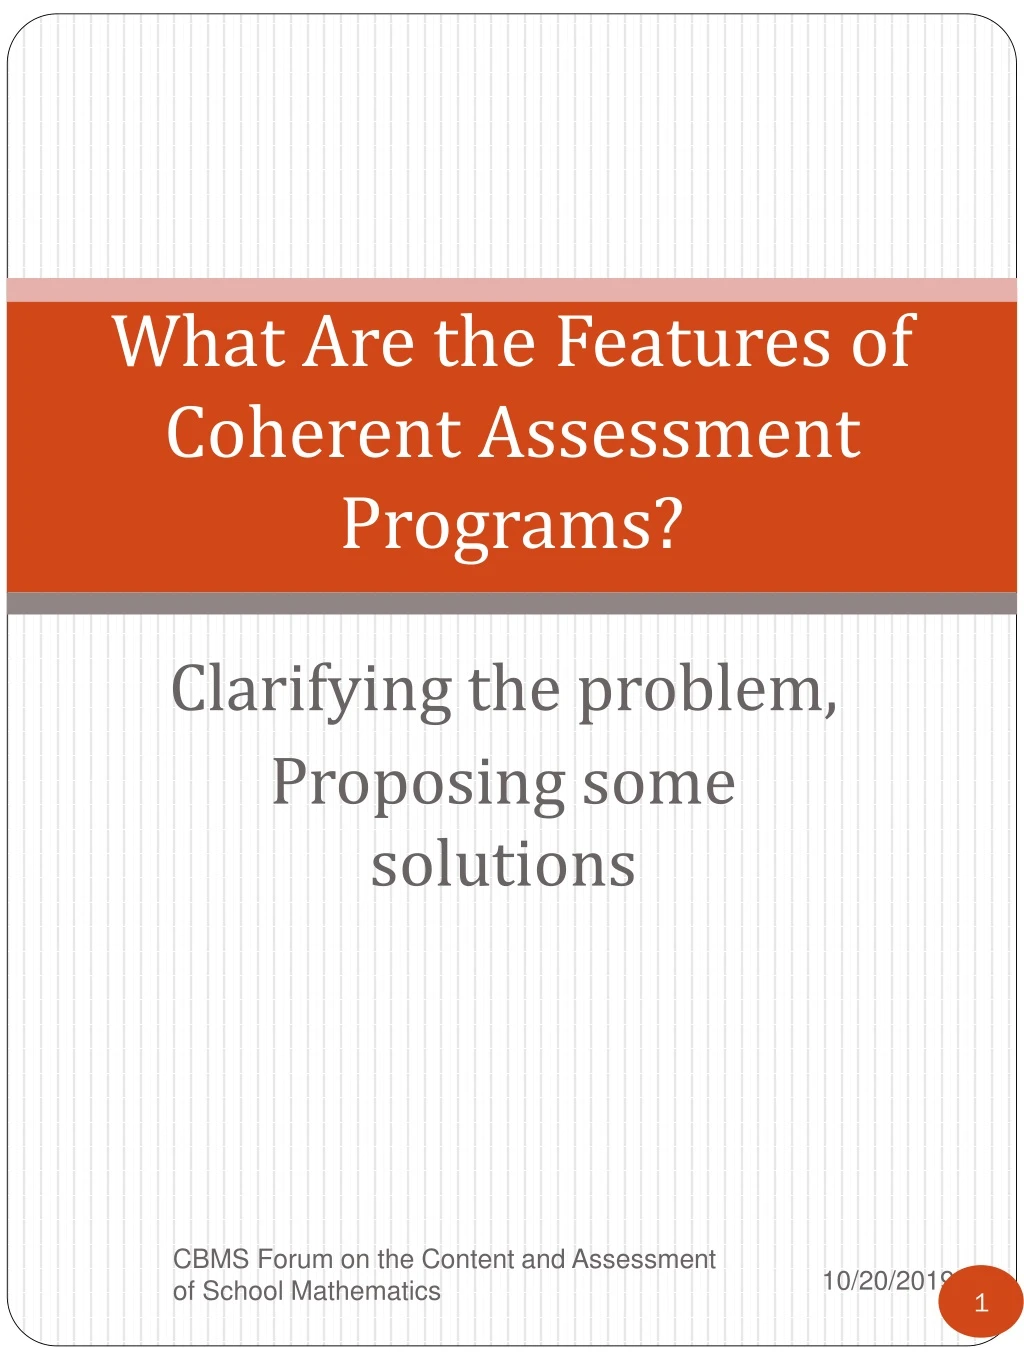 what are the features of coherent assessment programs